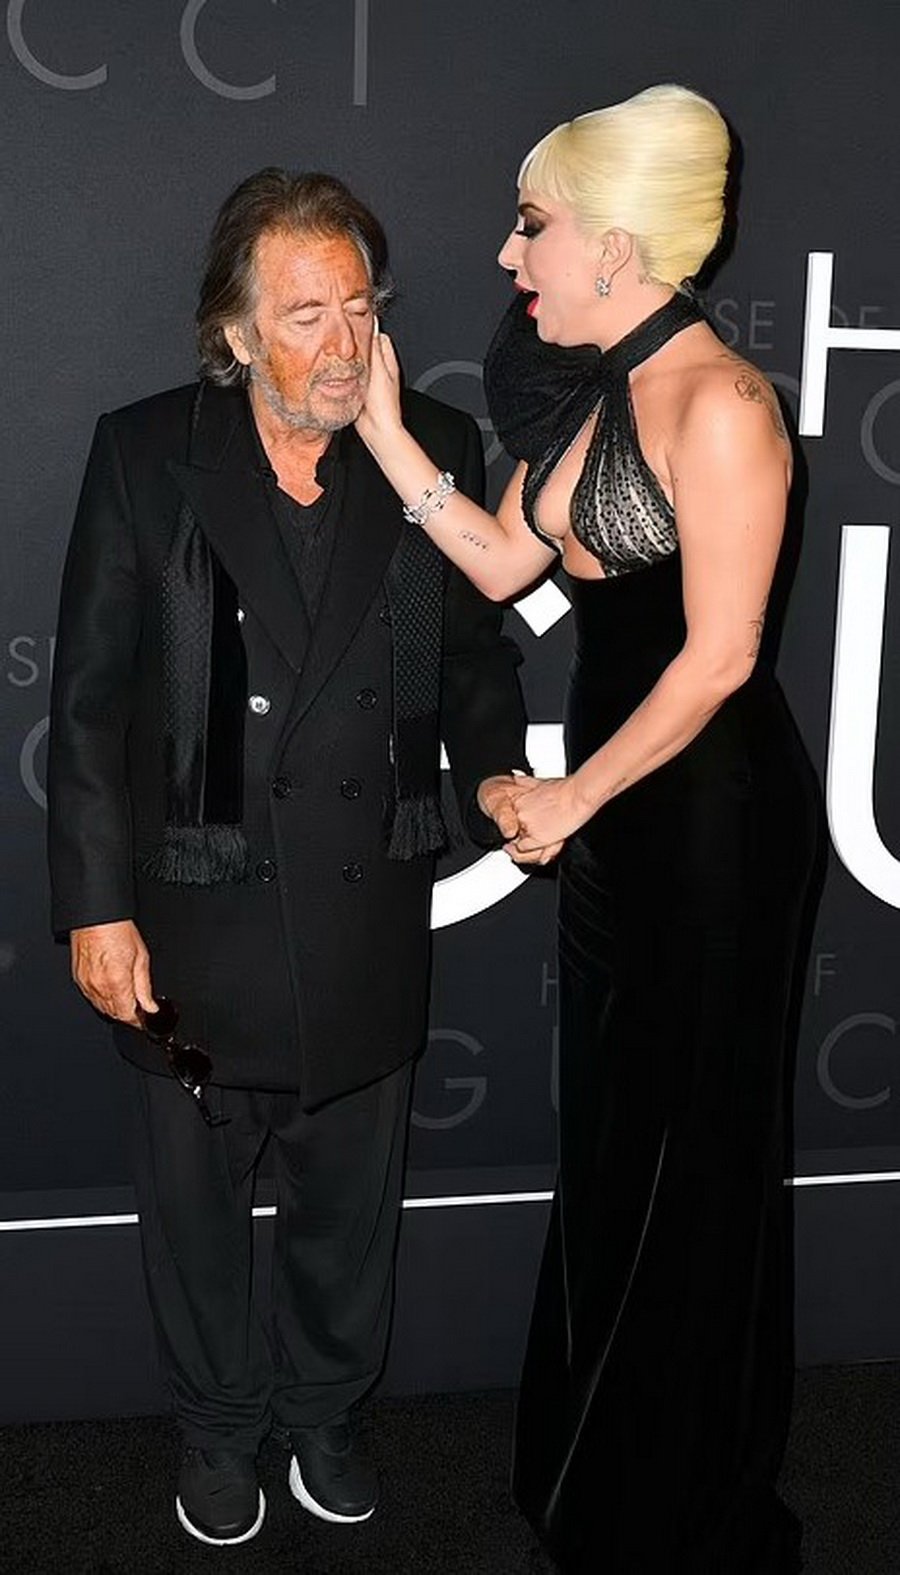 Lady Gaga with a bold outfit at the premiere of House Of Gucci